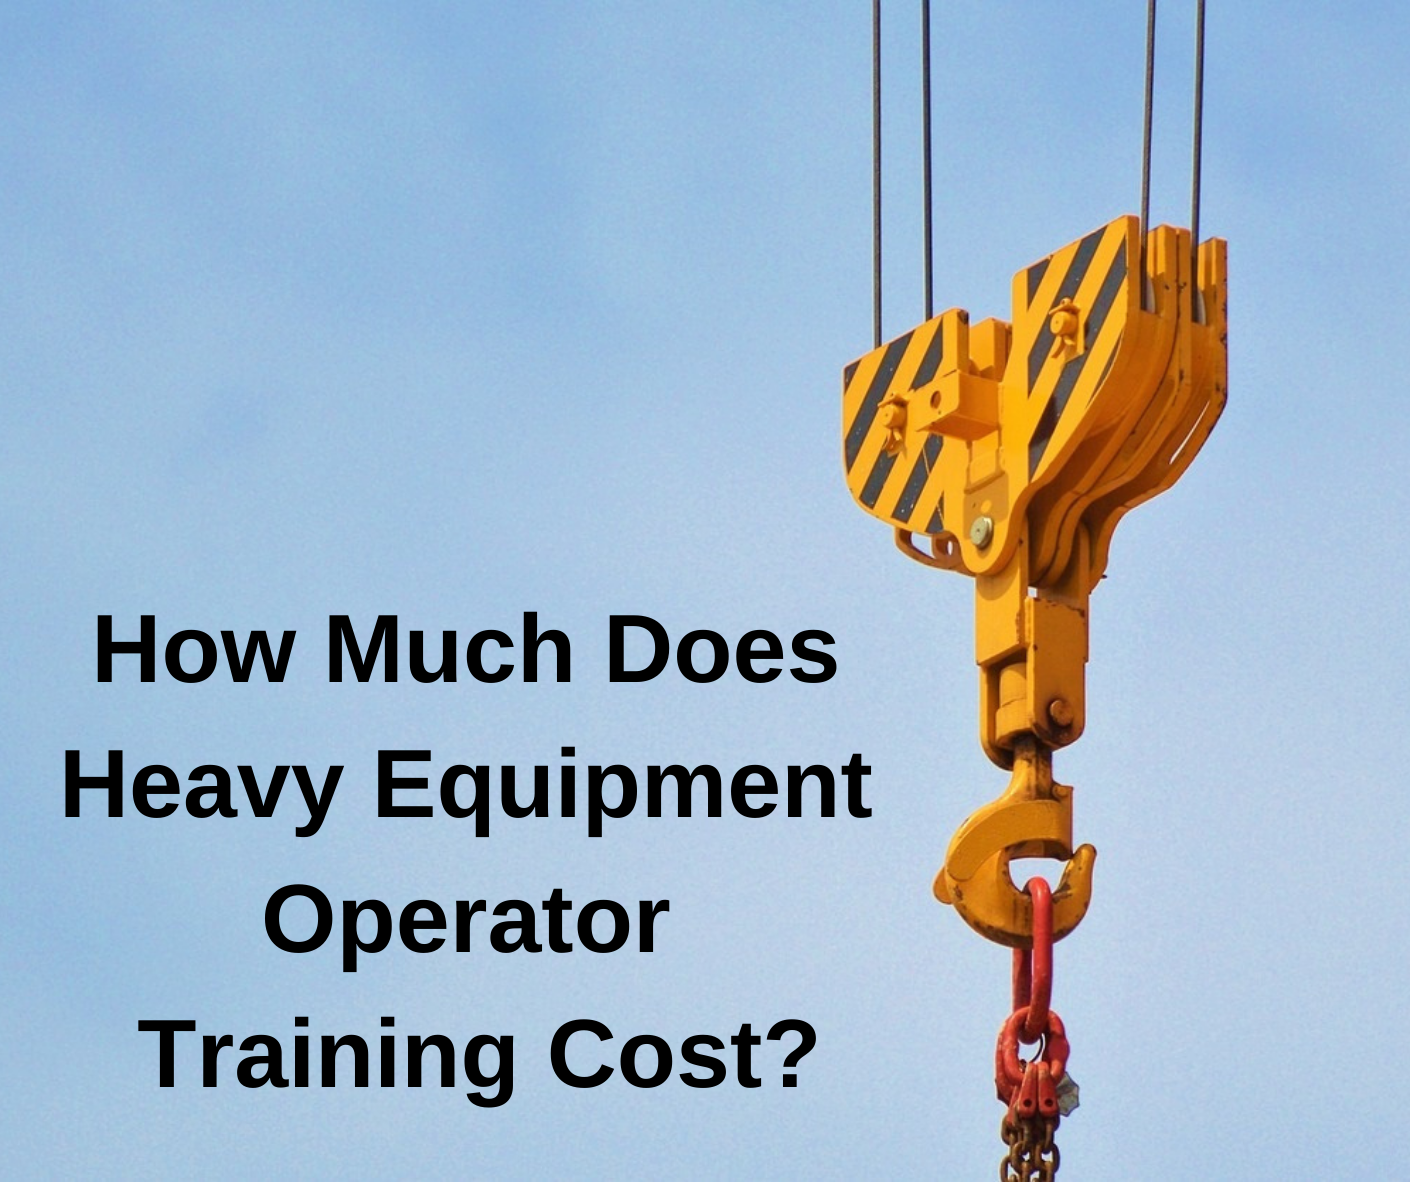 How Much Does Heavy Equipment Operator Training Cost